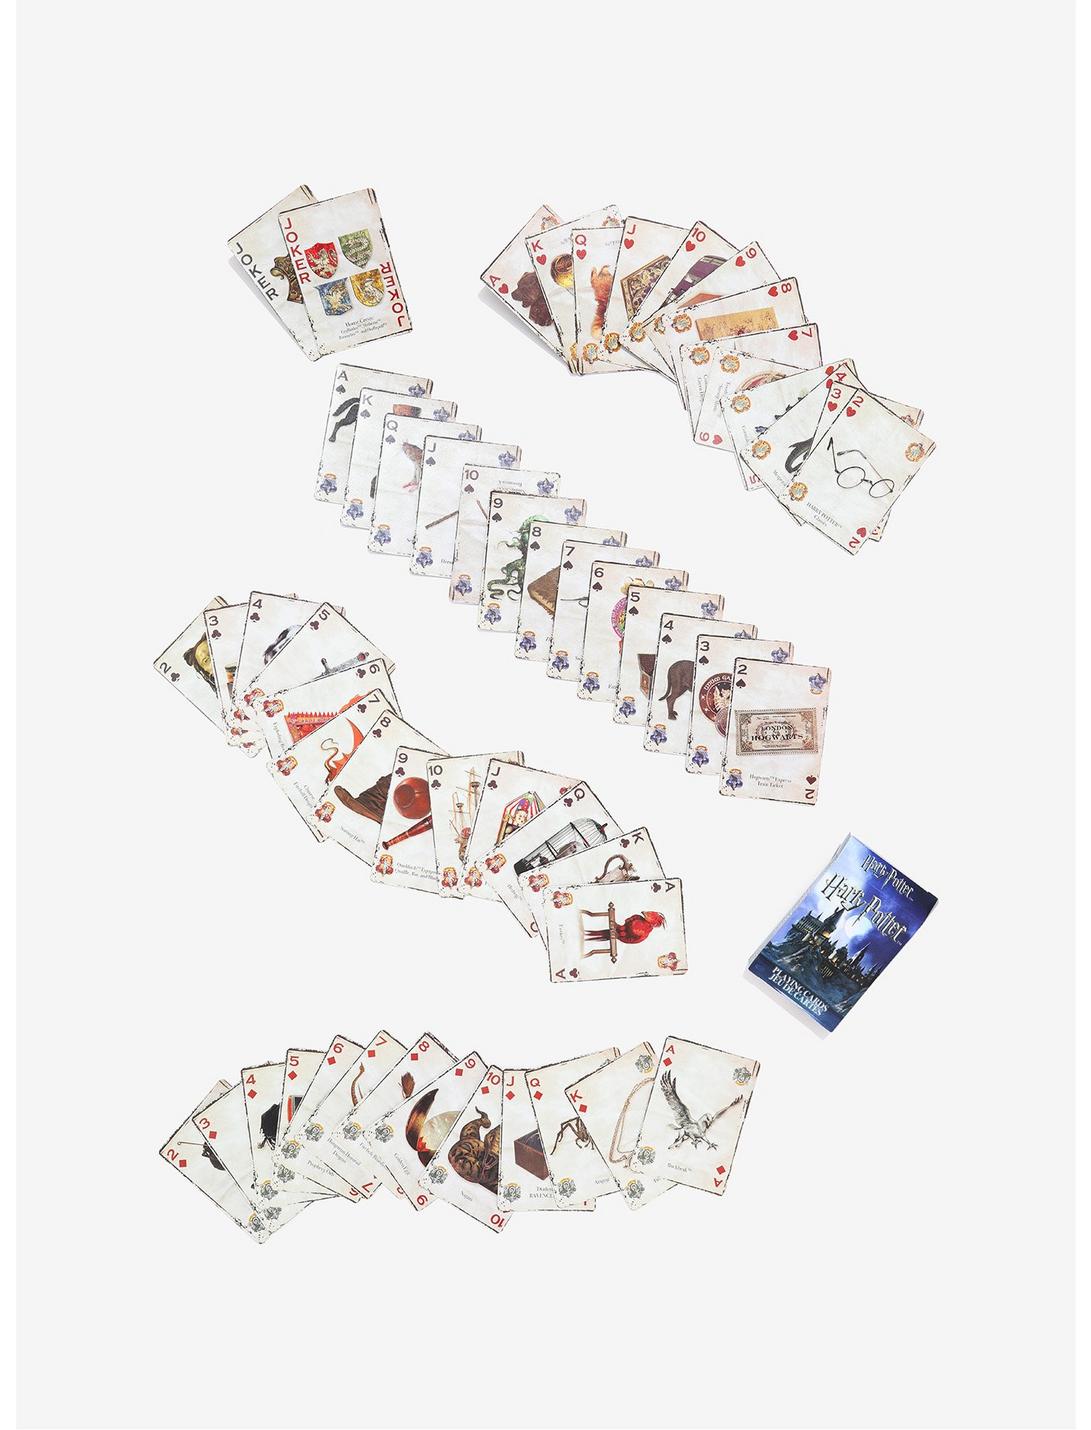 Harry Potter Playing Cards, , hi-res